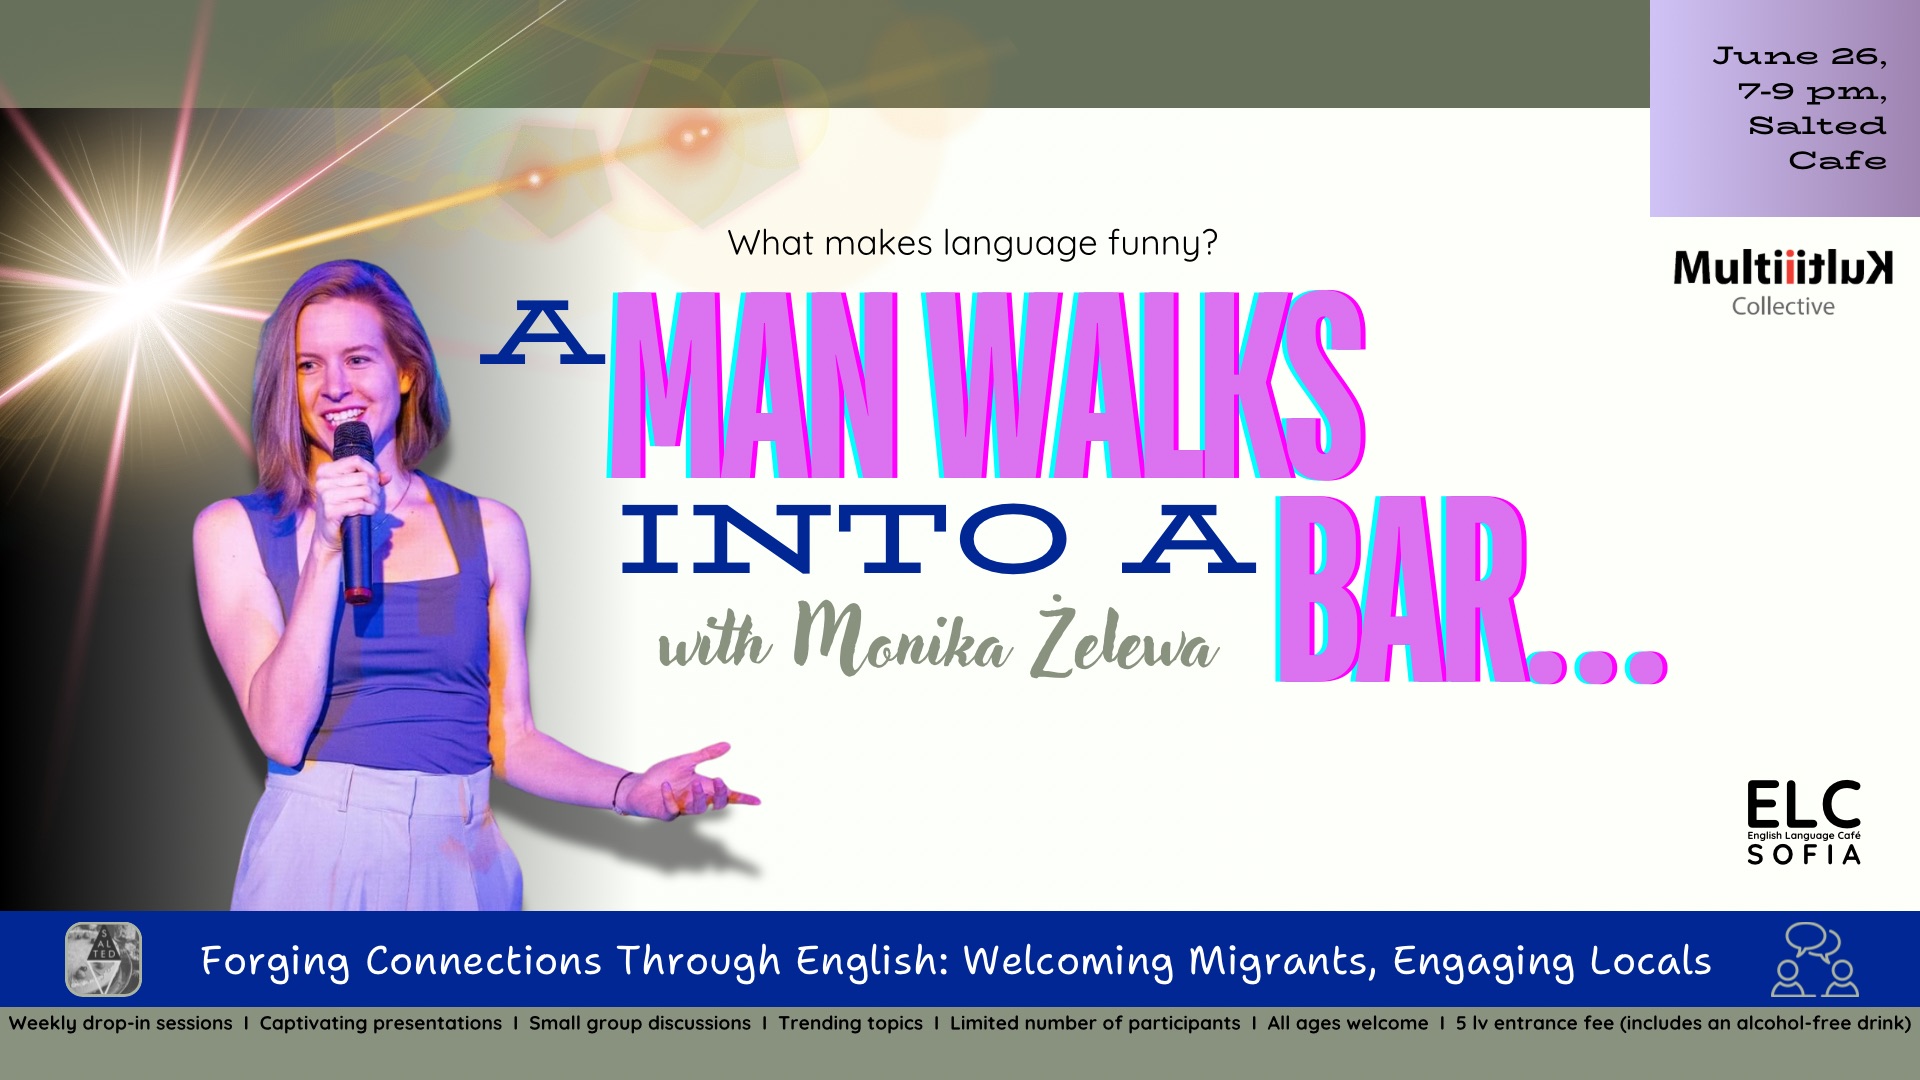 A Man Walks into a Bar - What Makes Language Funny?